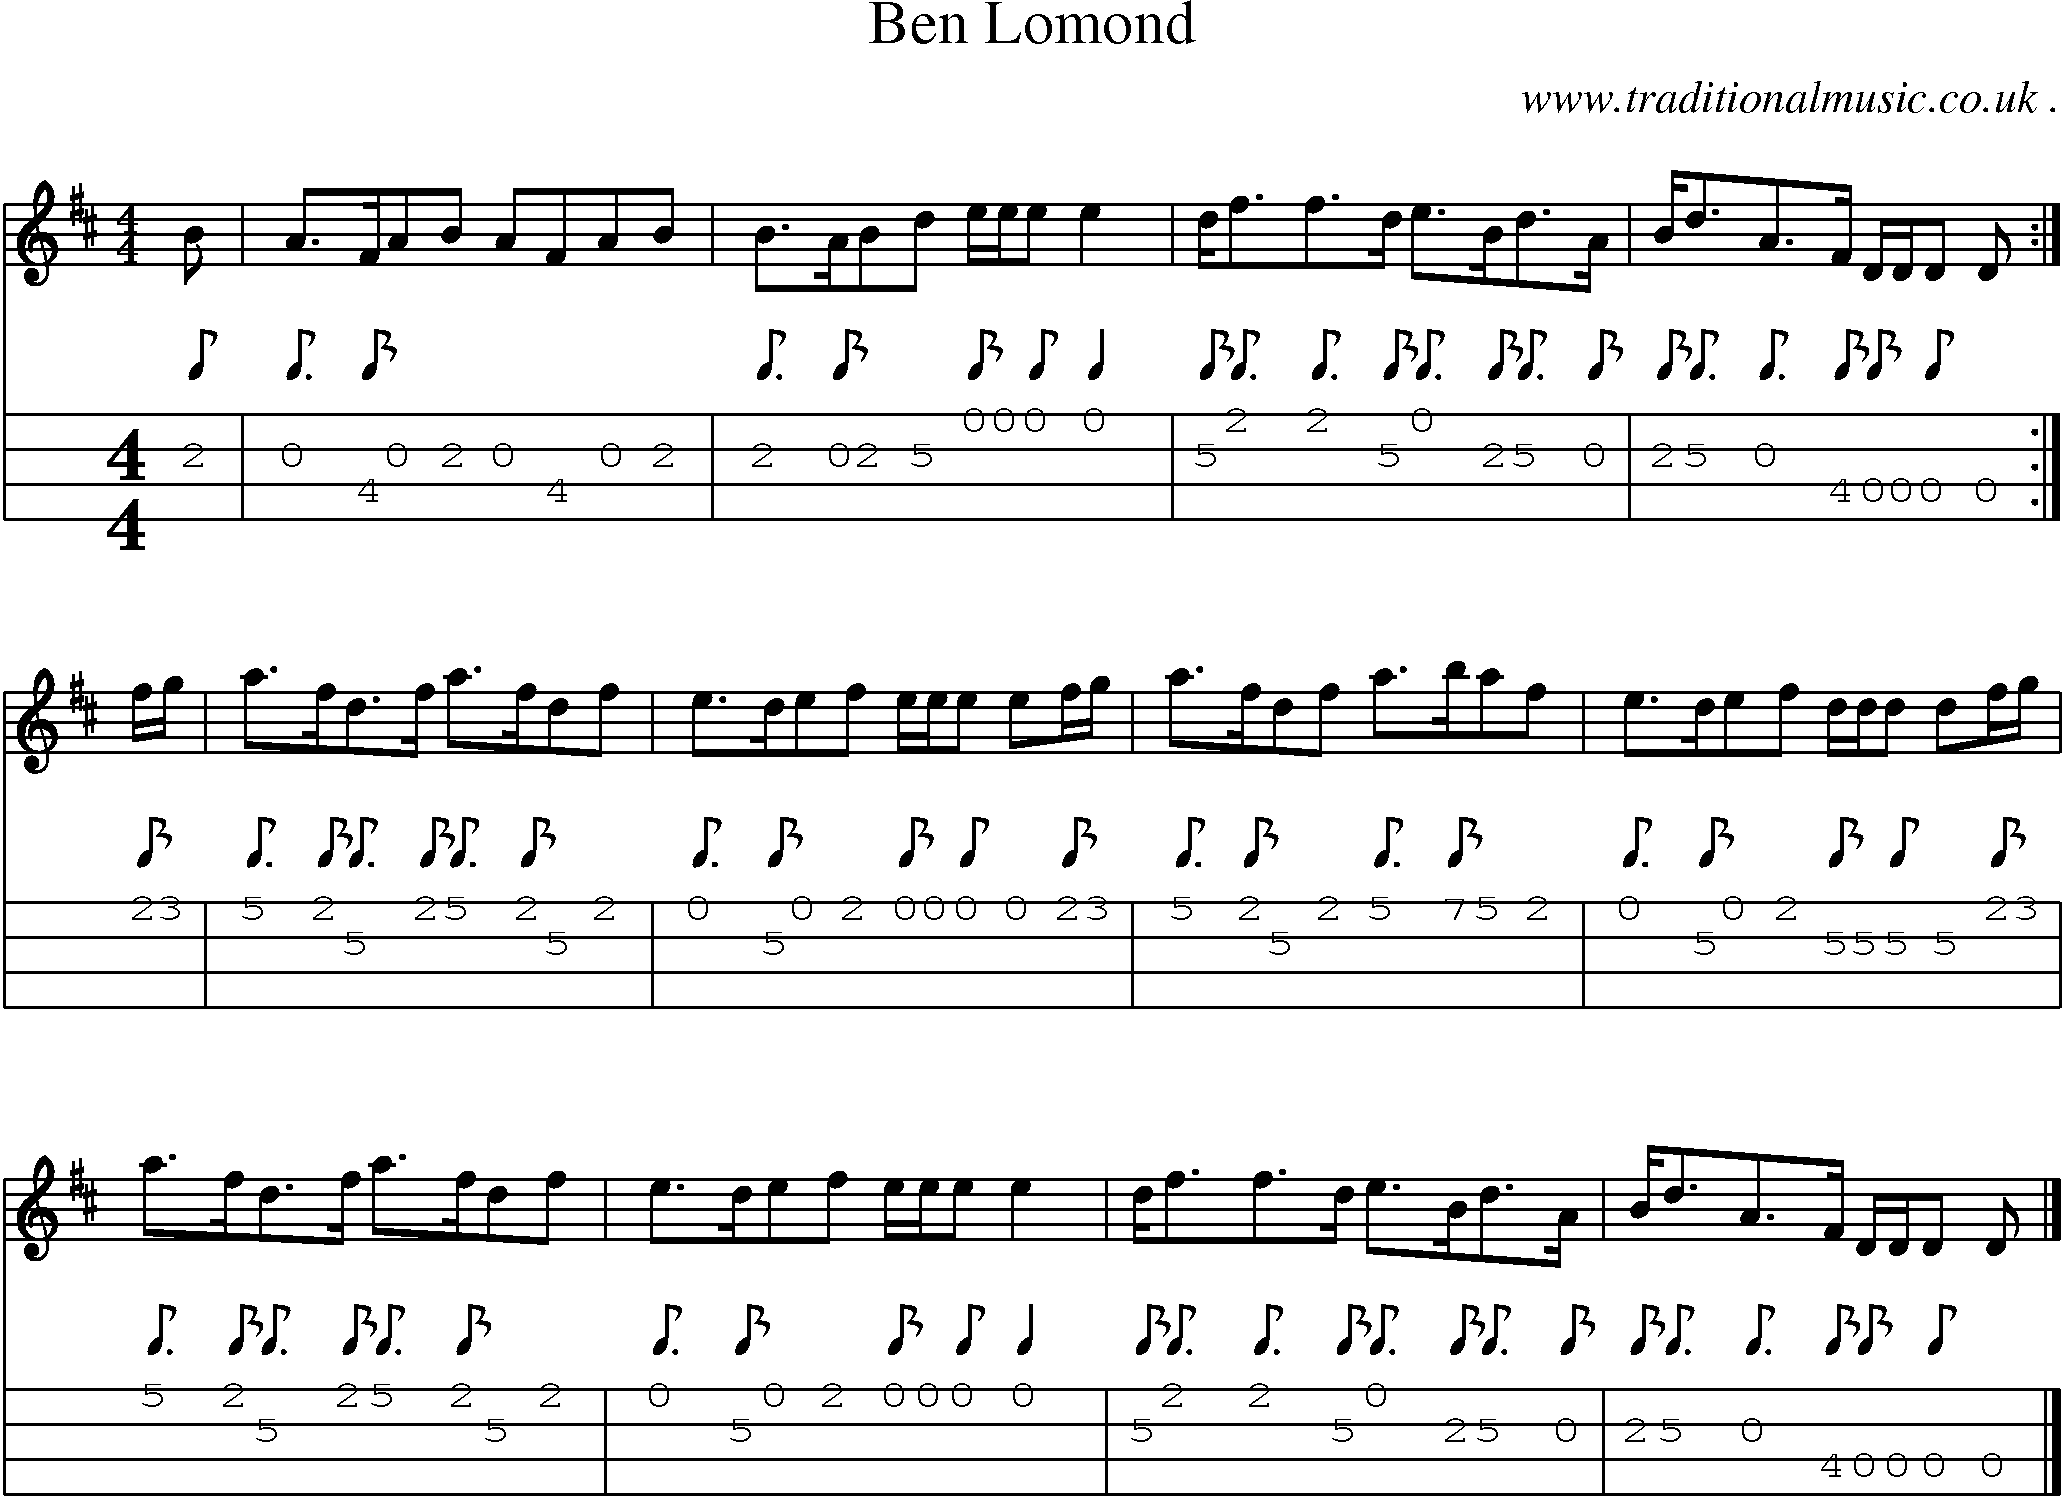 Sheet-music  score, Chords and Mandolin Tabs for Ben Lomond 